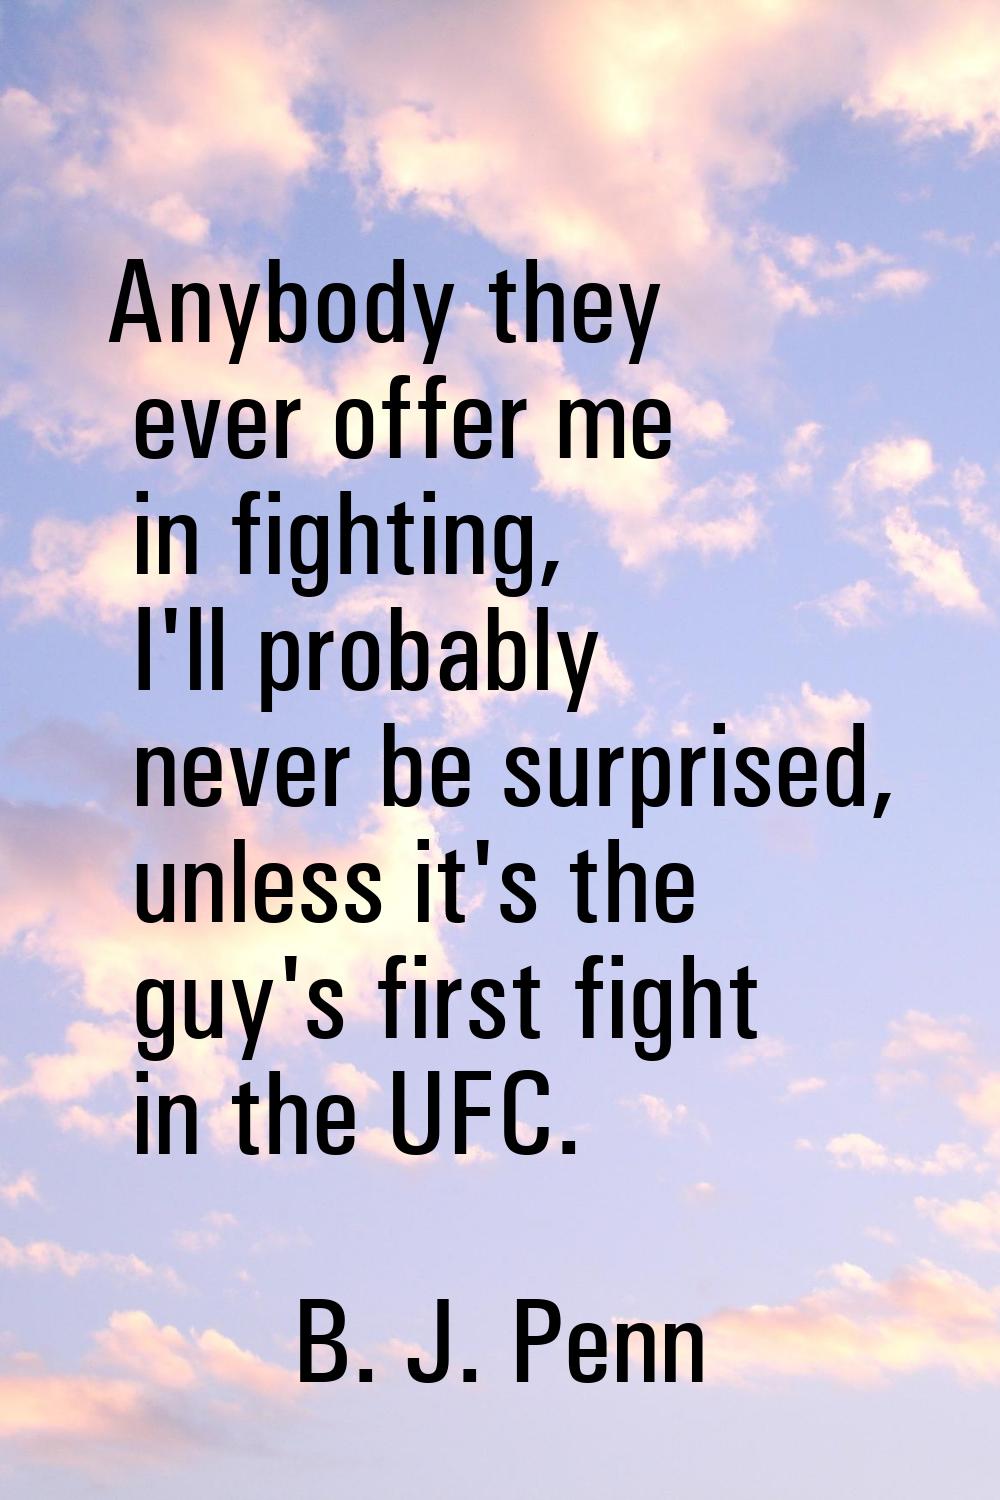 Anybody they ever offer me in fighting, I'll probably never be surprised, unless it's the guy's fir